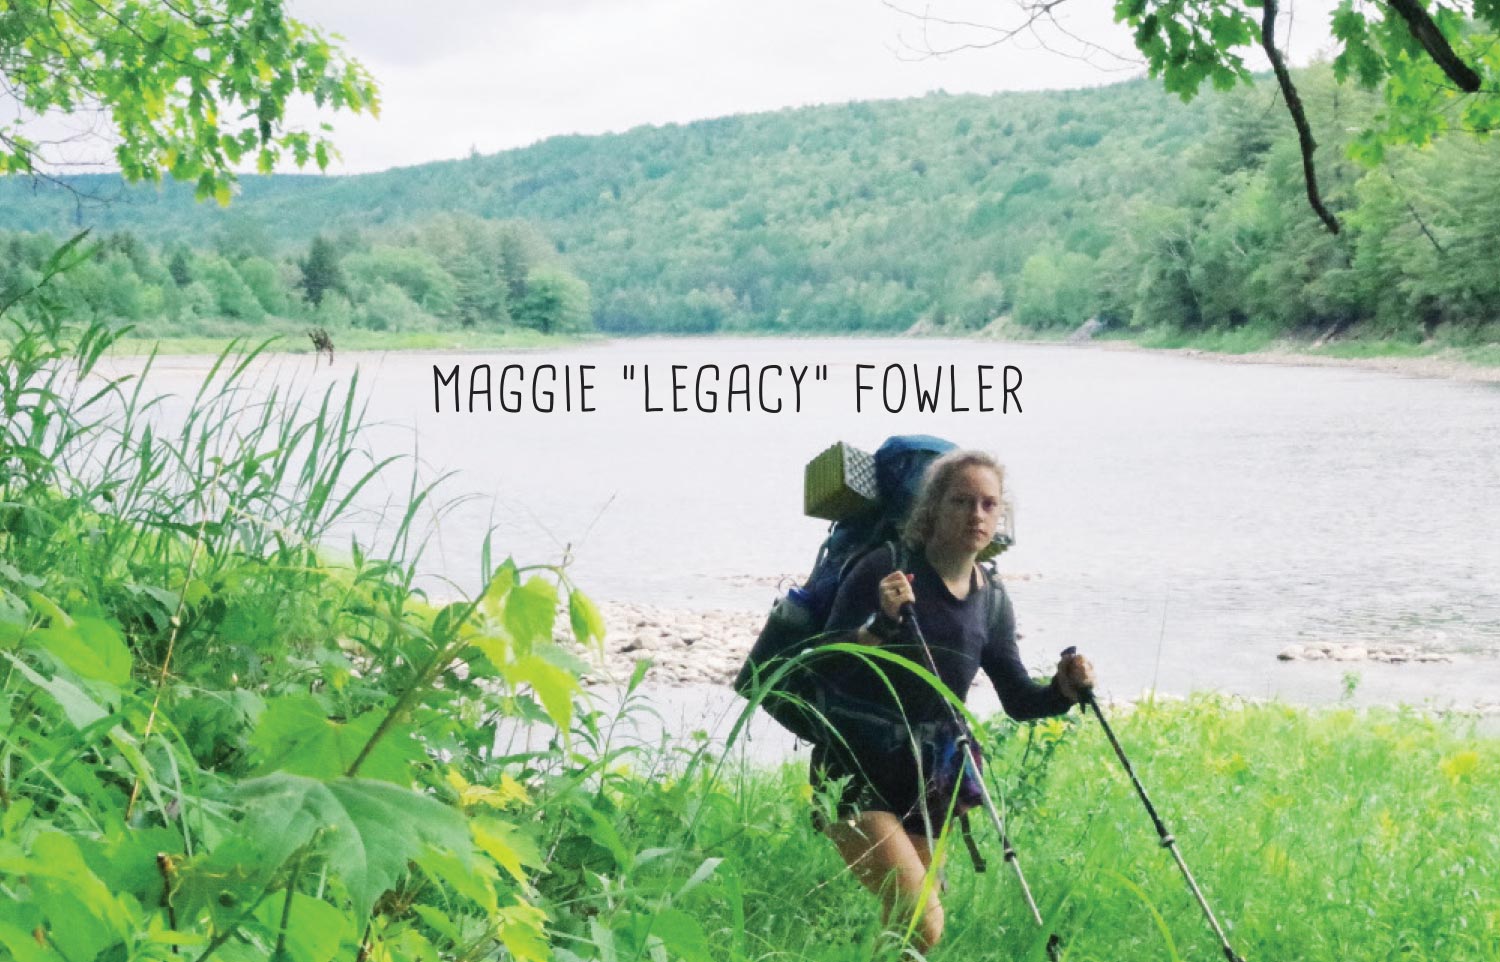 Maggie “Legacy” Fowler